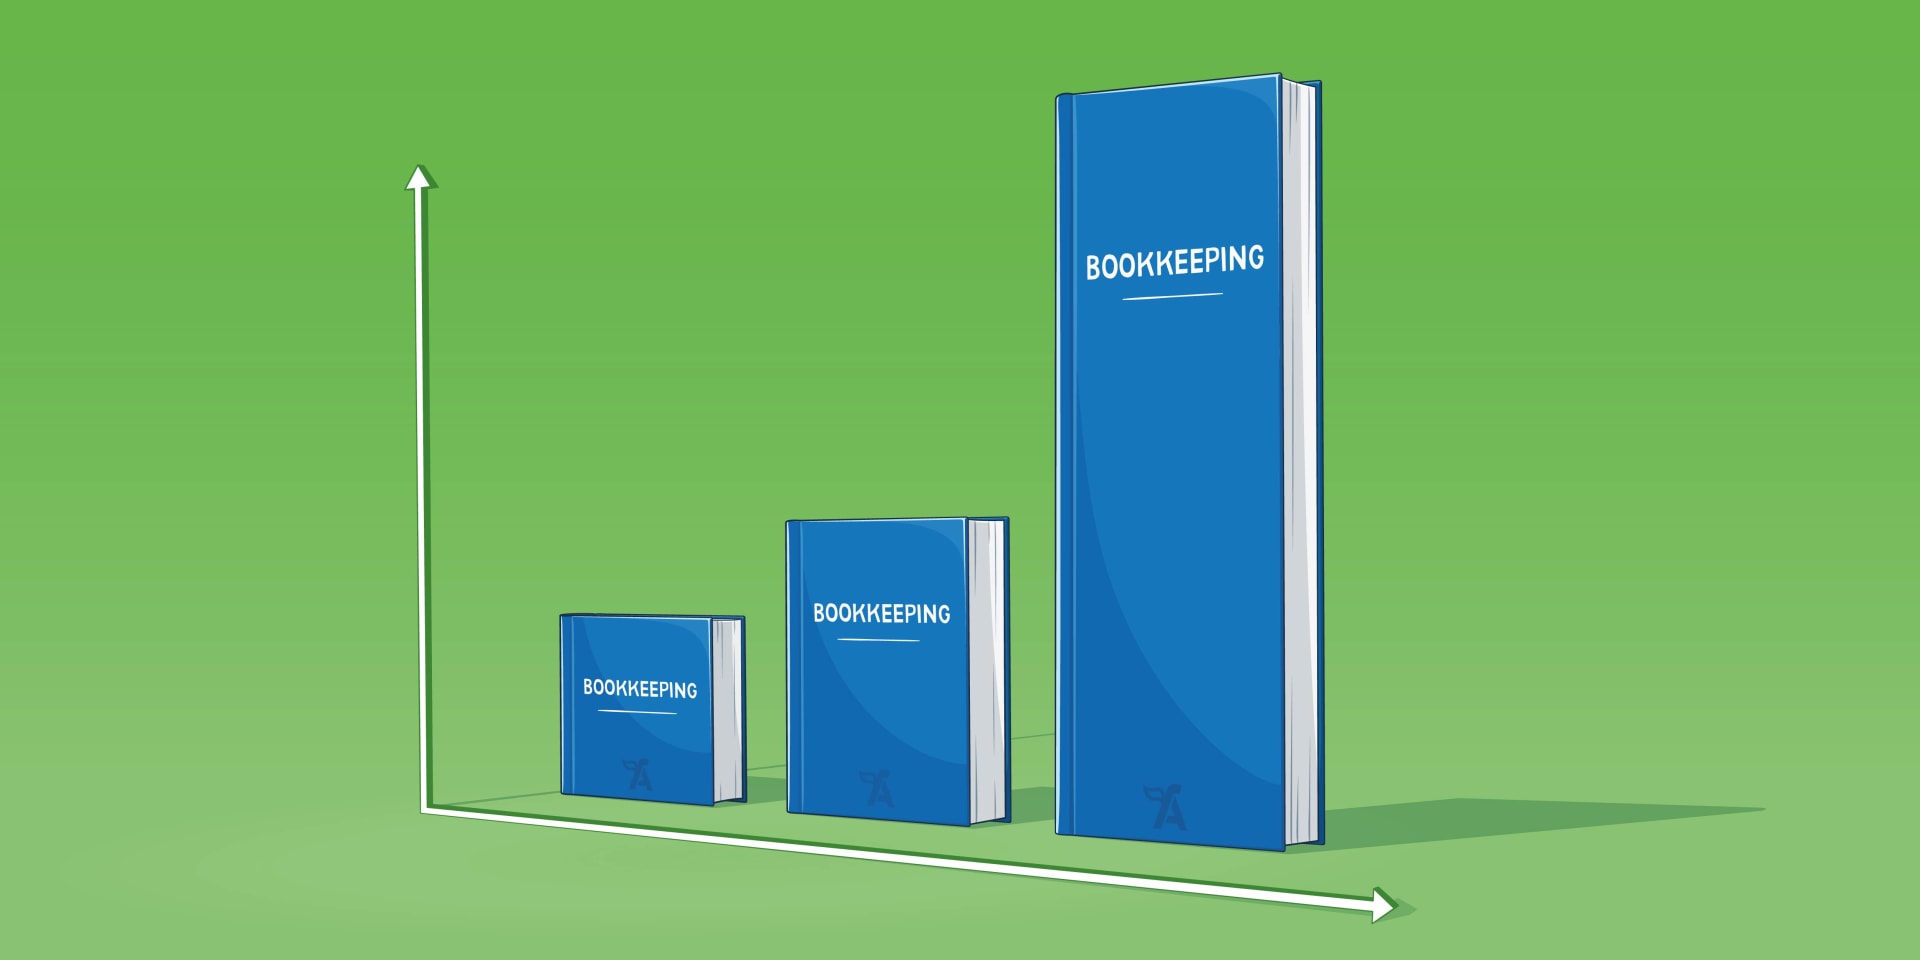 Illustration of a bar chart where each bar is represented by books of varying height labelled 'Bookkeeping'.